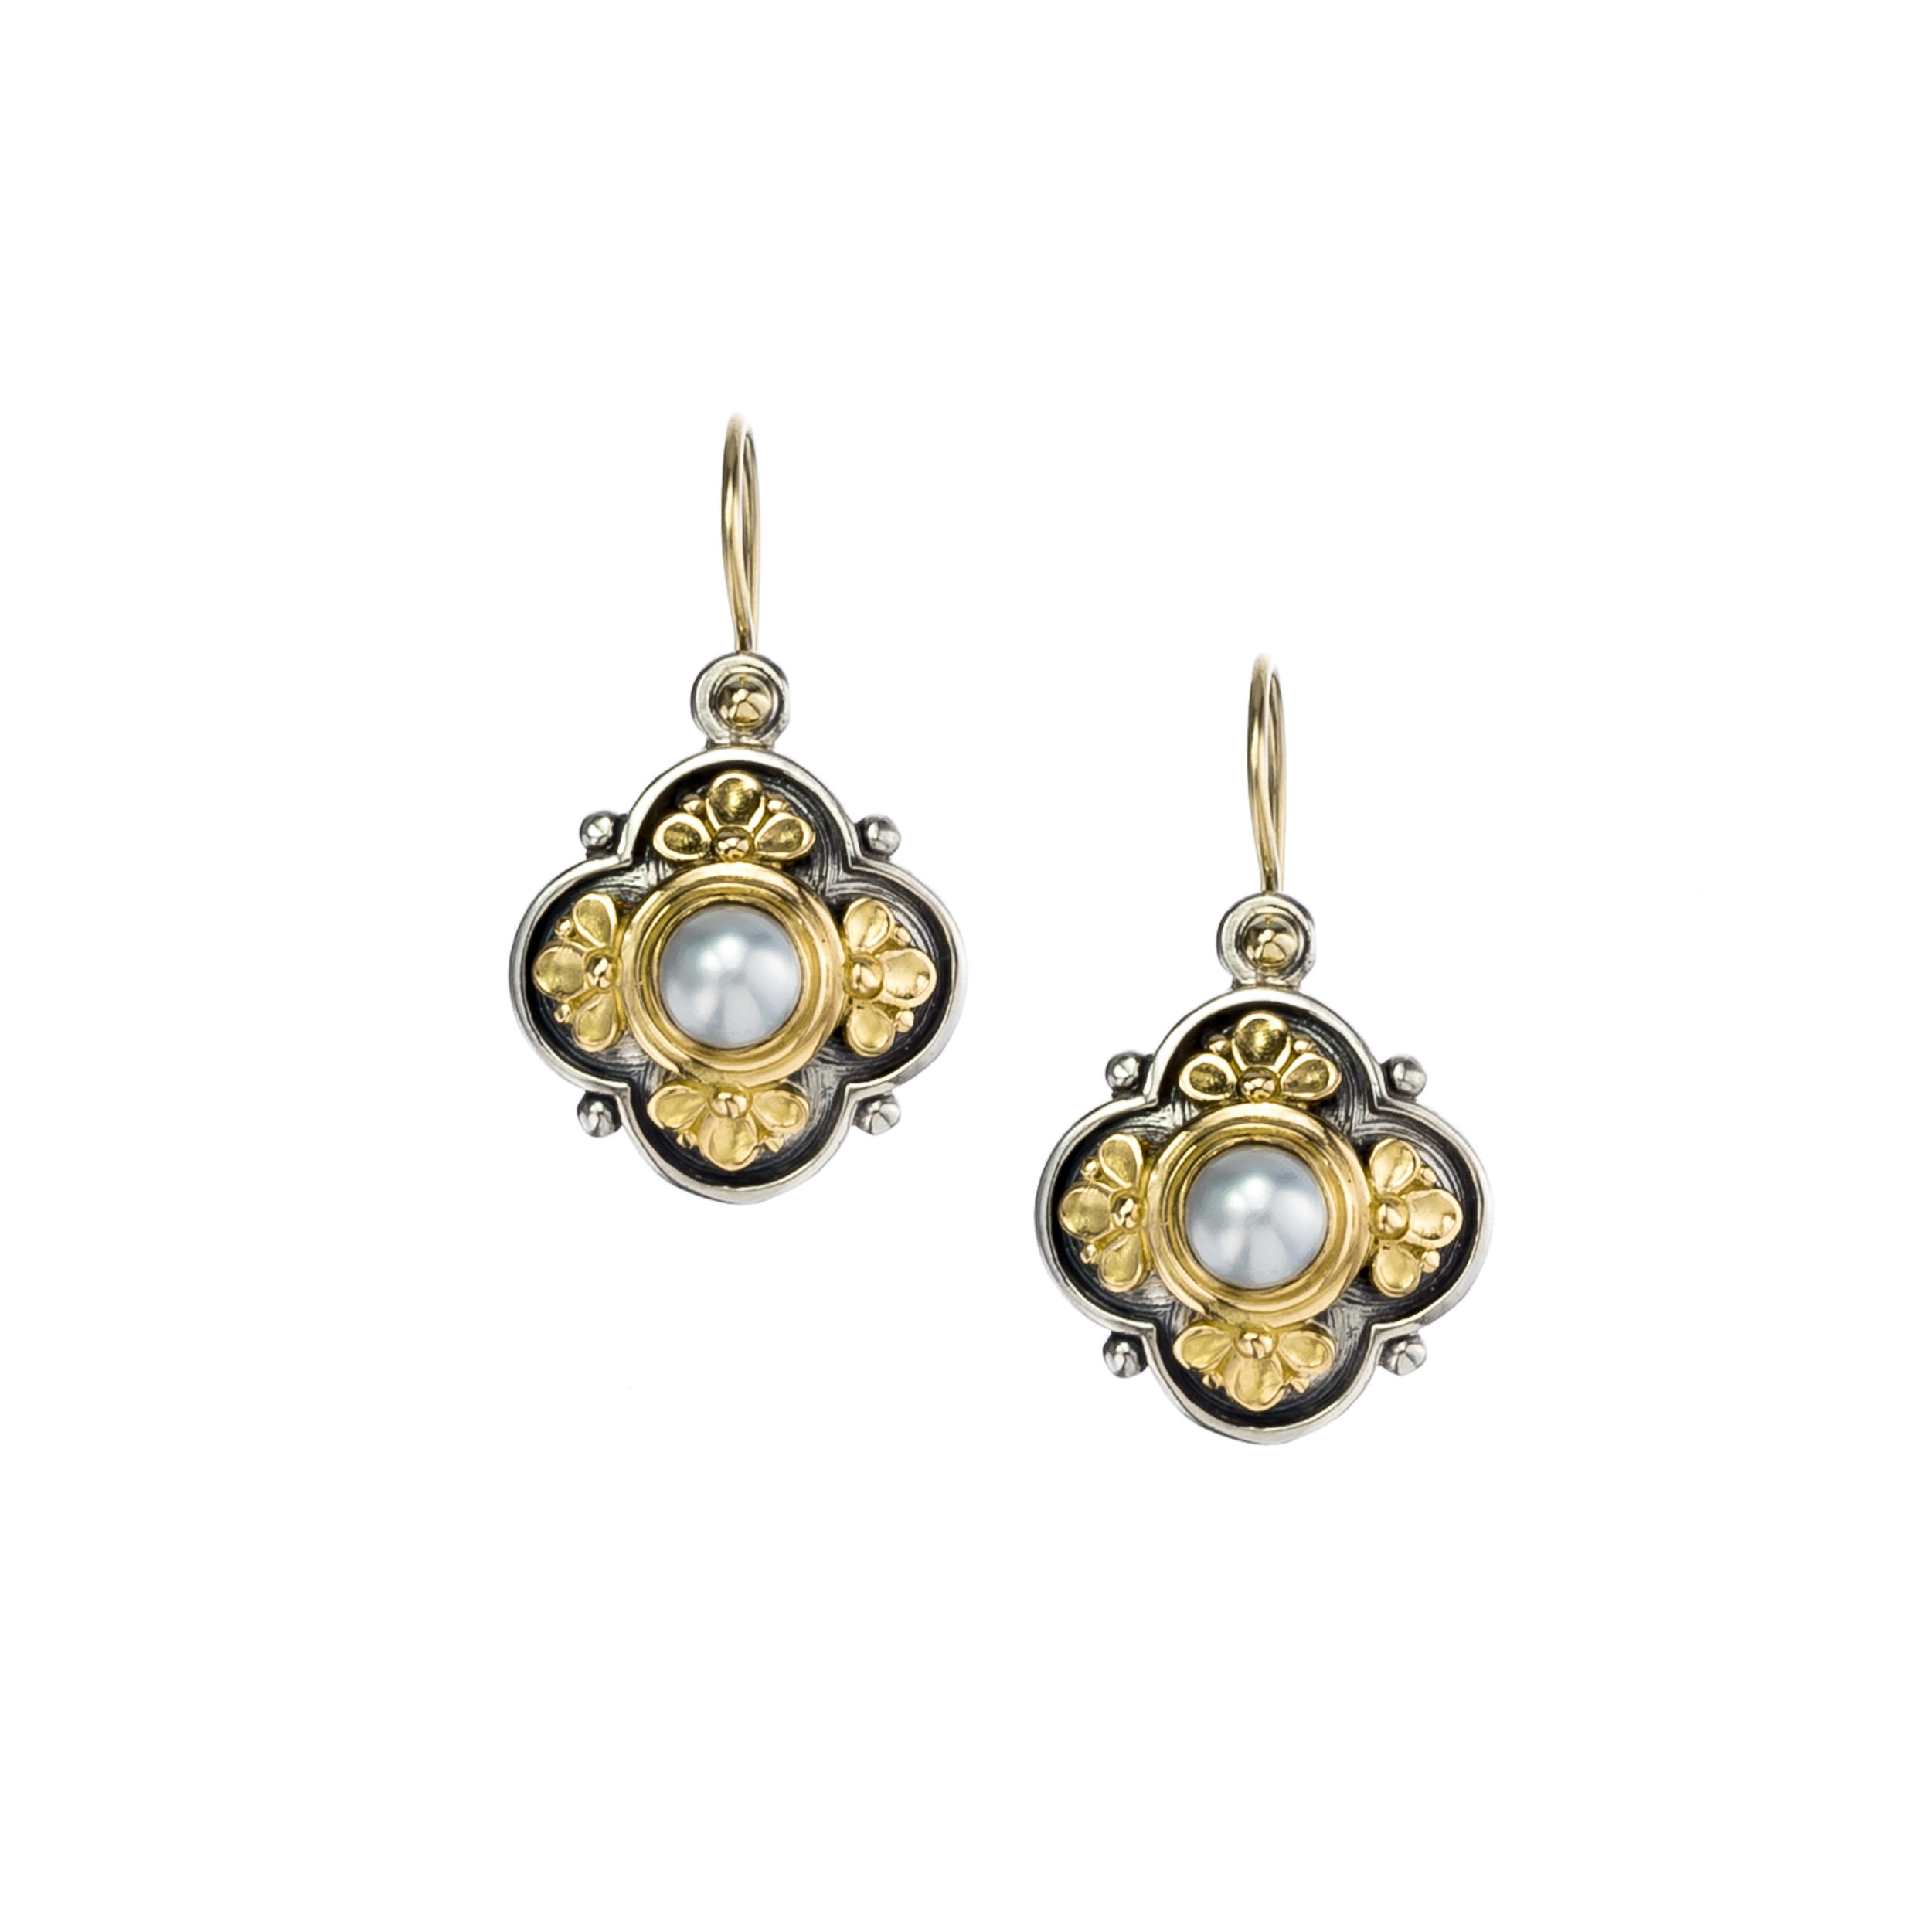 Athenian Flower Earrings in 18K Gold and Sterling Silver with Aquamarine